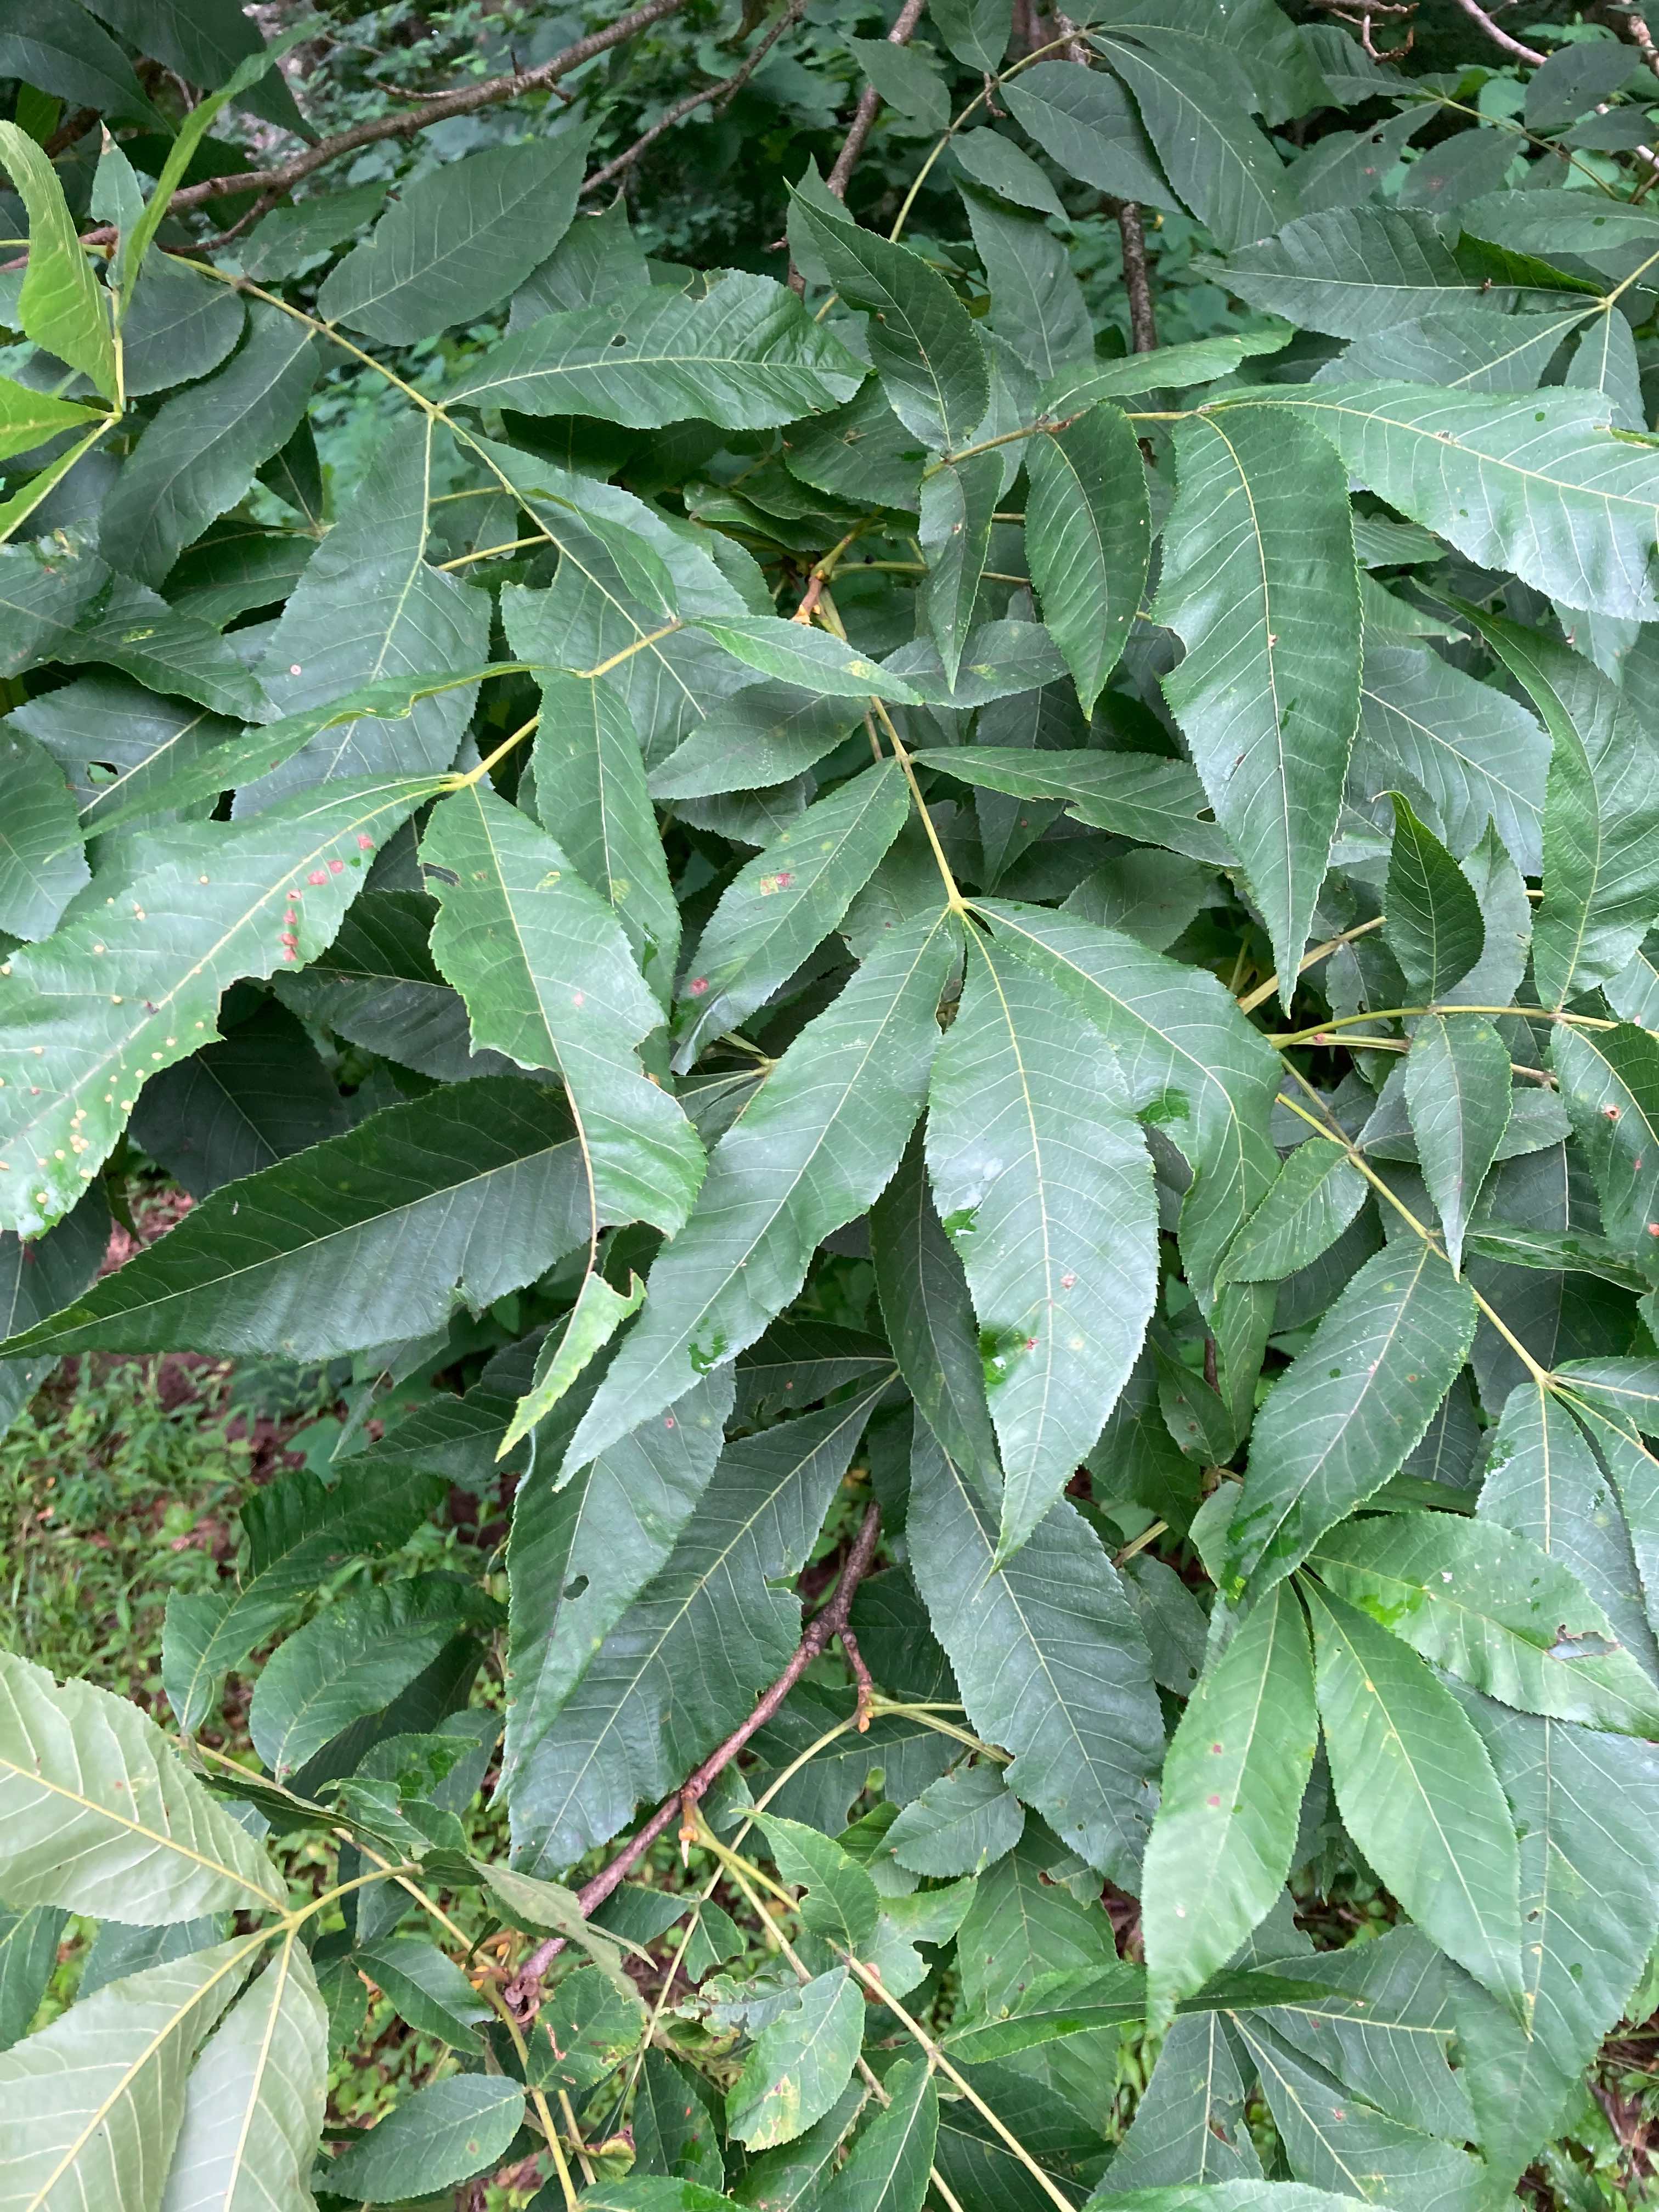 The Scientific Name is Carya cordiformis. You will likely hear them called Bitternut Hickory, Swamp Hickory. This picture shows the The alternate, compound leaves have 7-11 leaflets and are lanceolate shaped. of Carya cordiformis